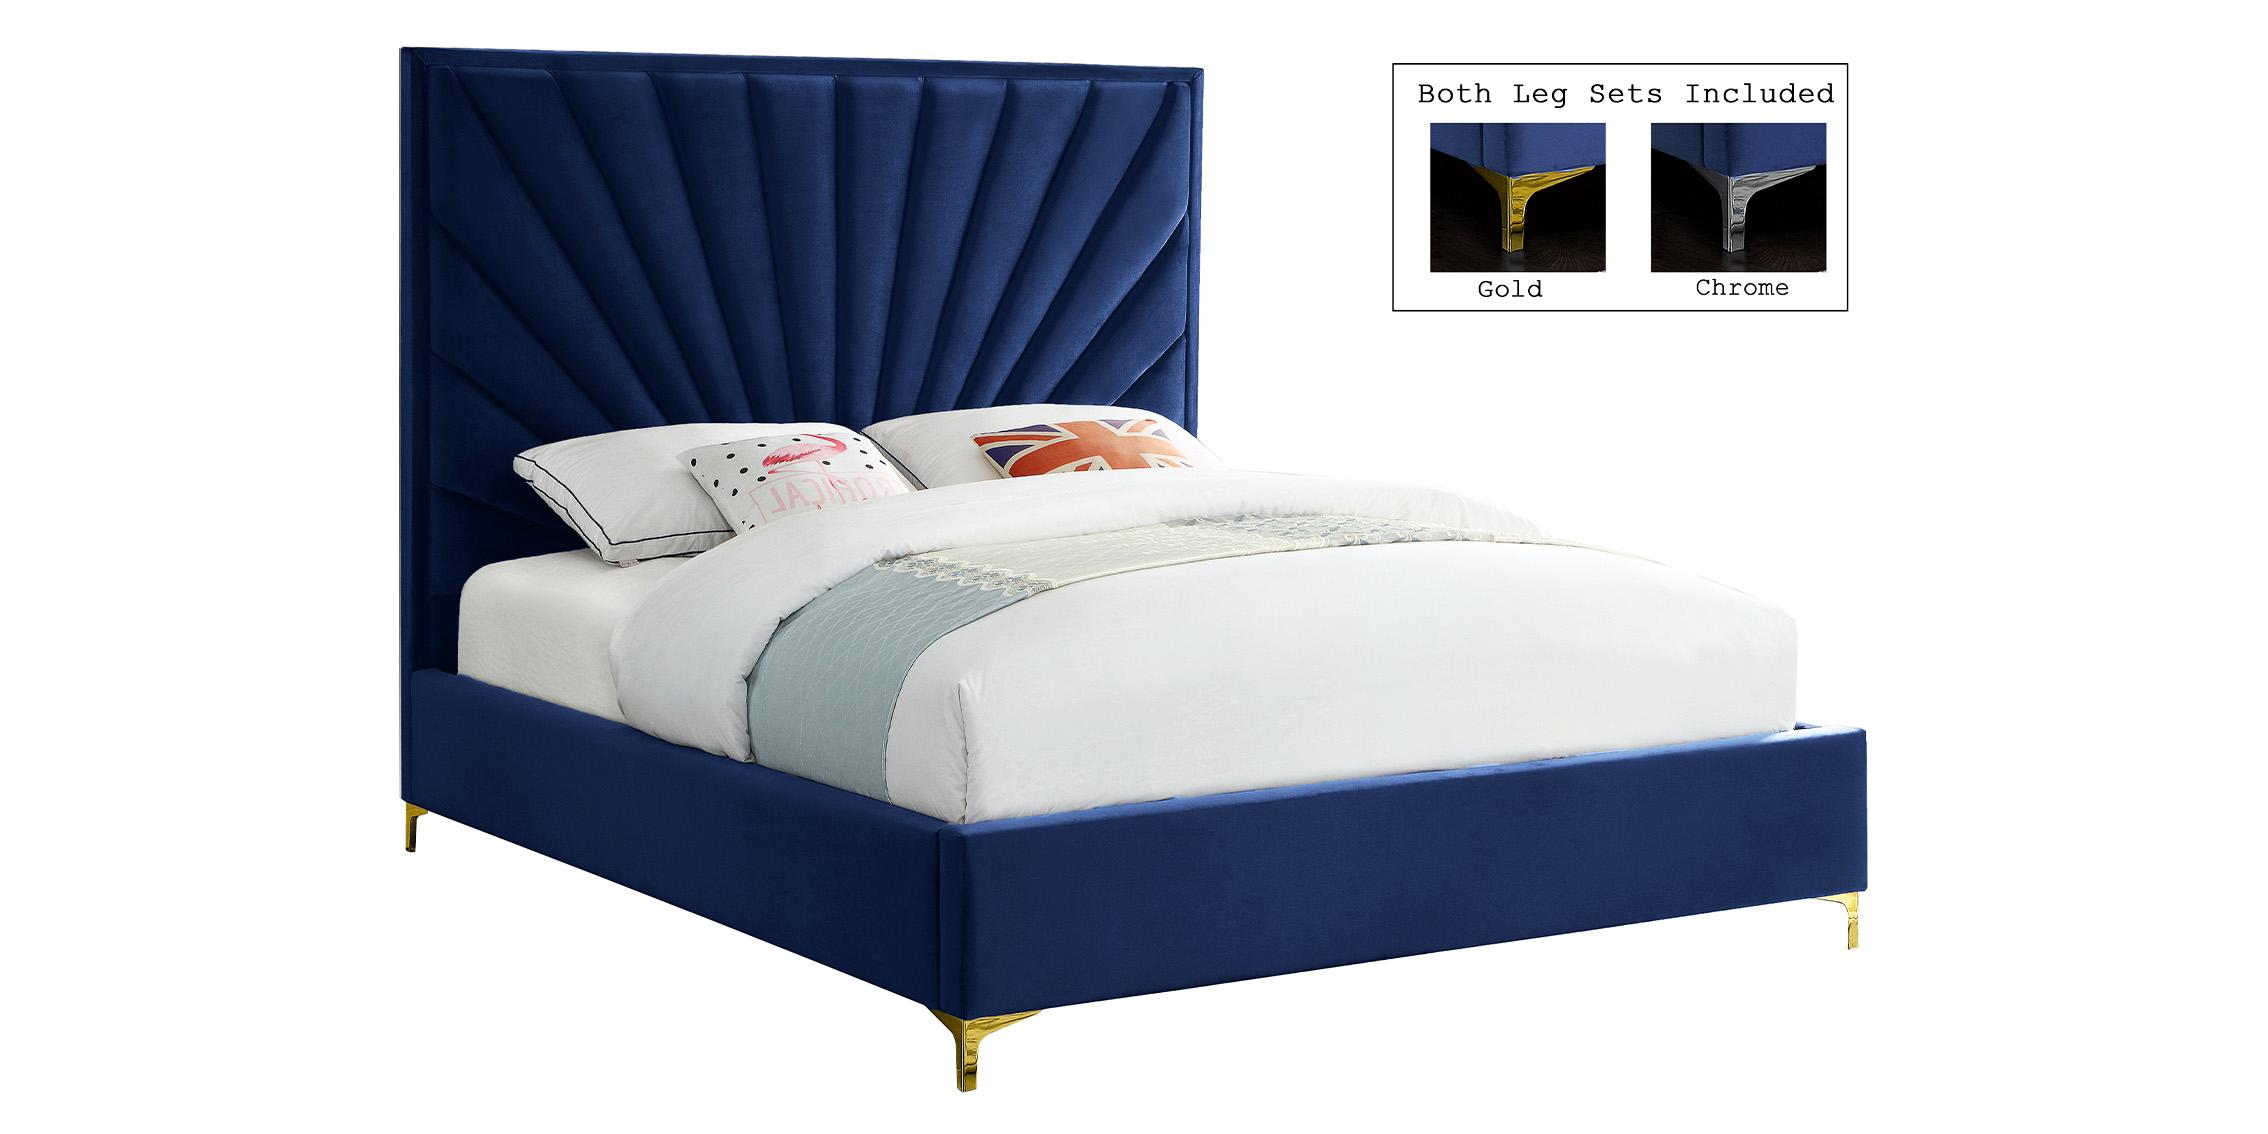 

    
Luxurious Navy Velvet Tufted King Bed ECLIPSE Meridian Contemporary Modern
